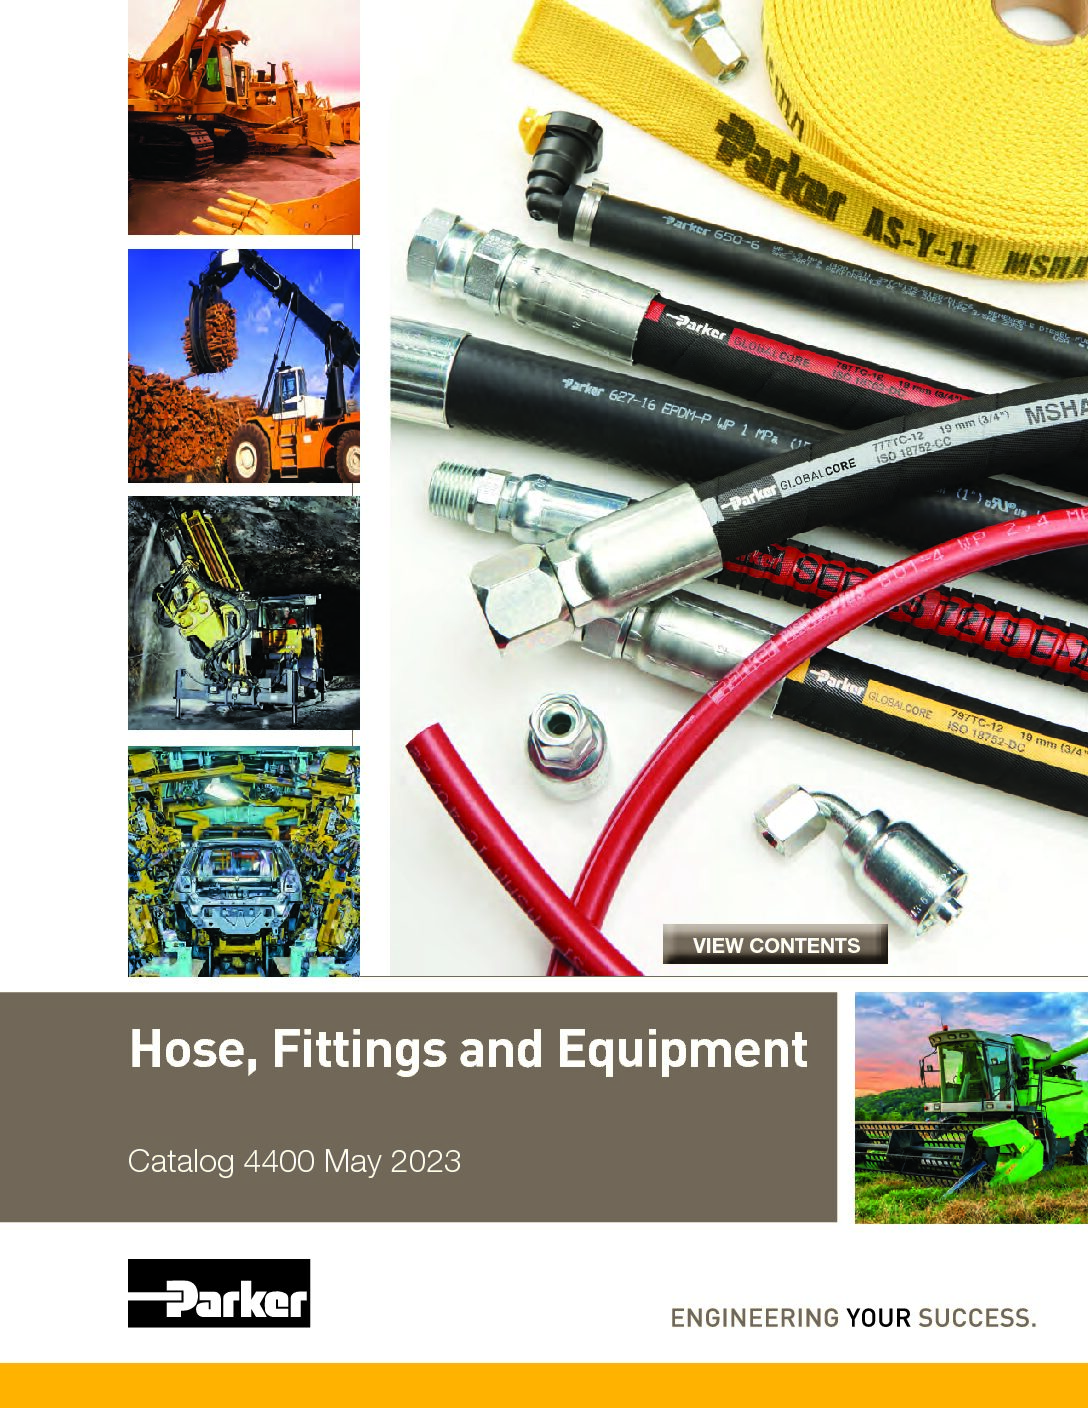 Parker Hose, Fittings, and Equipment Catalog 4400